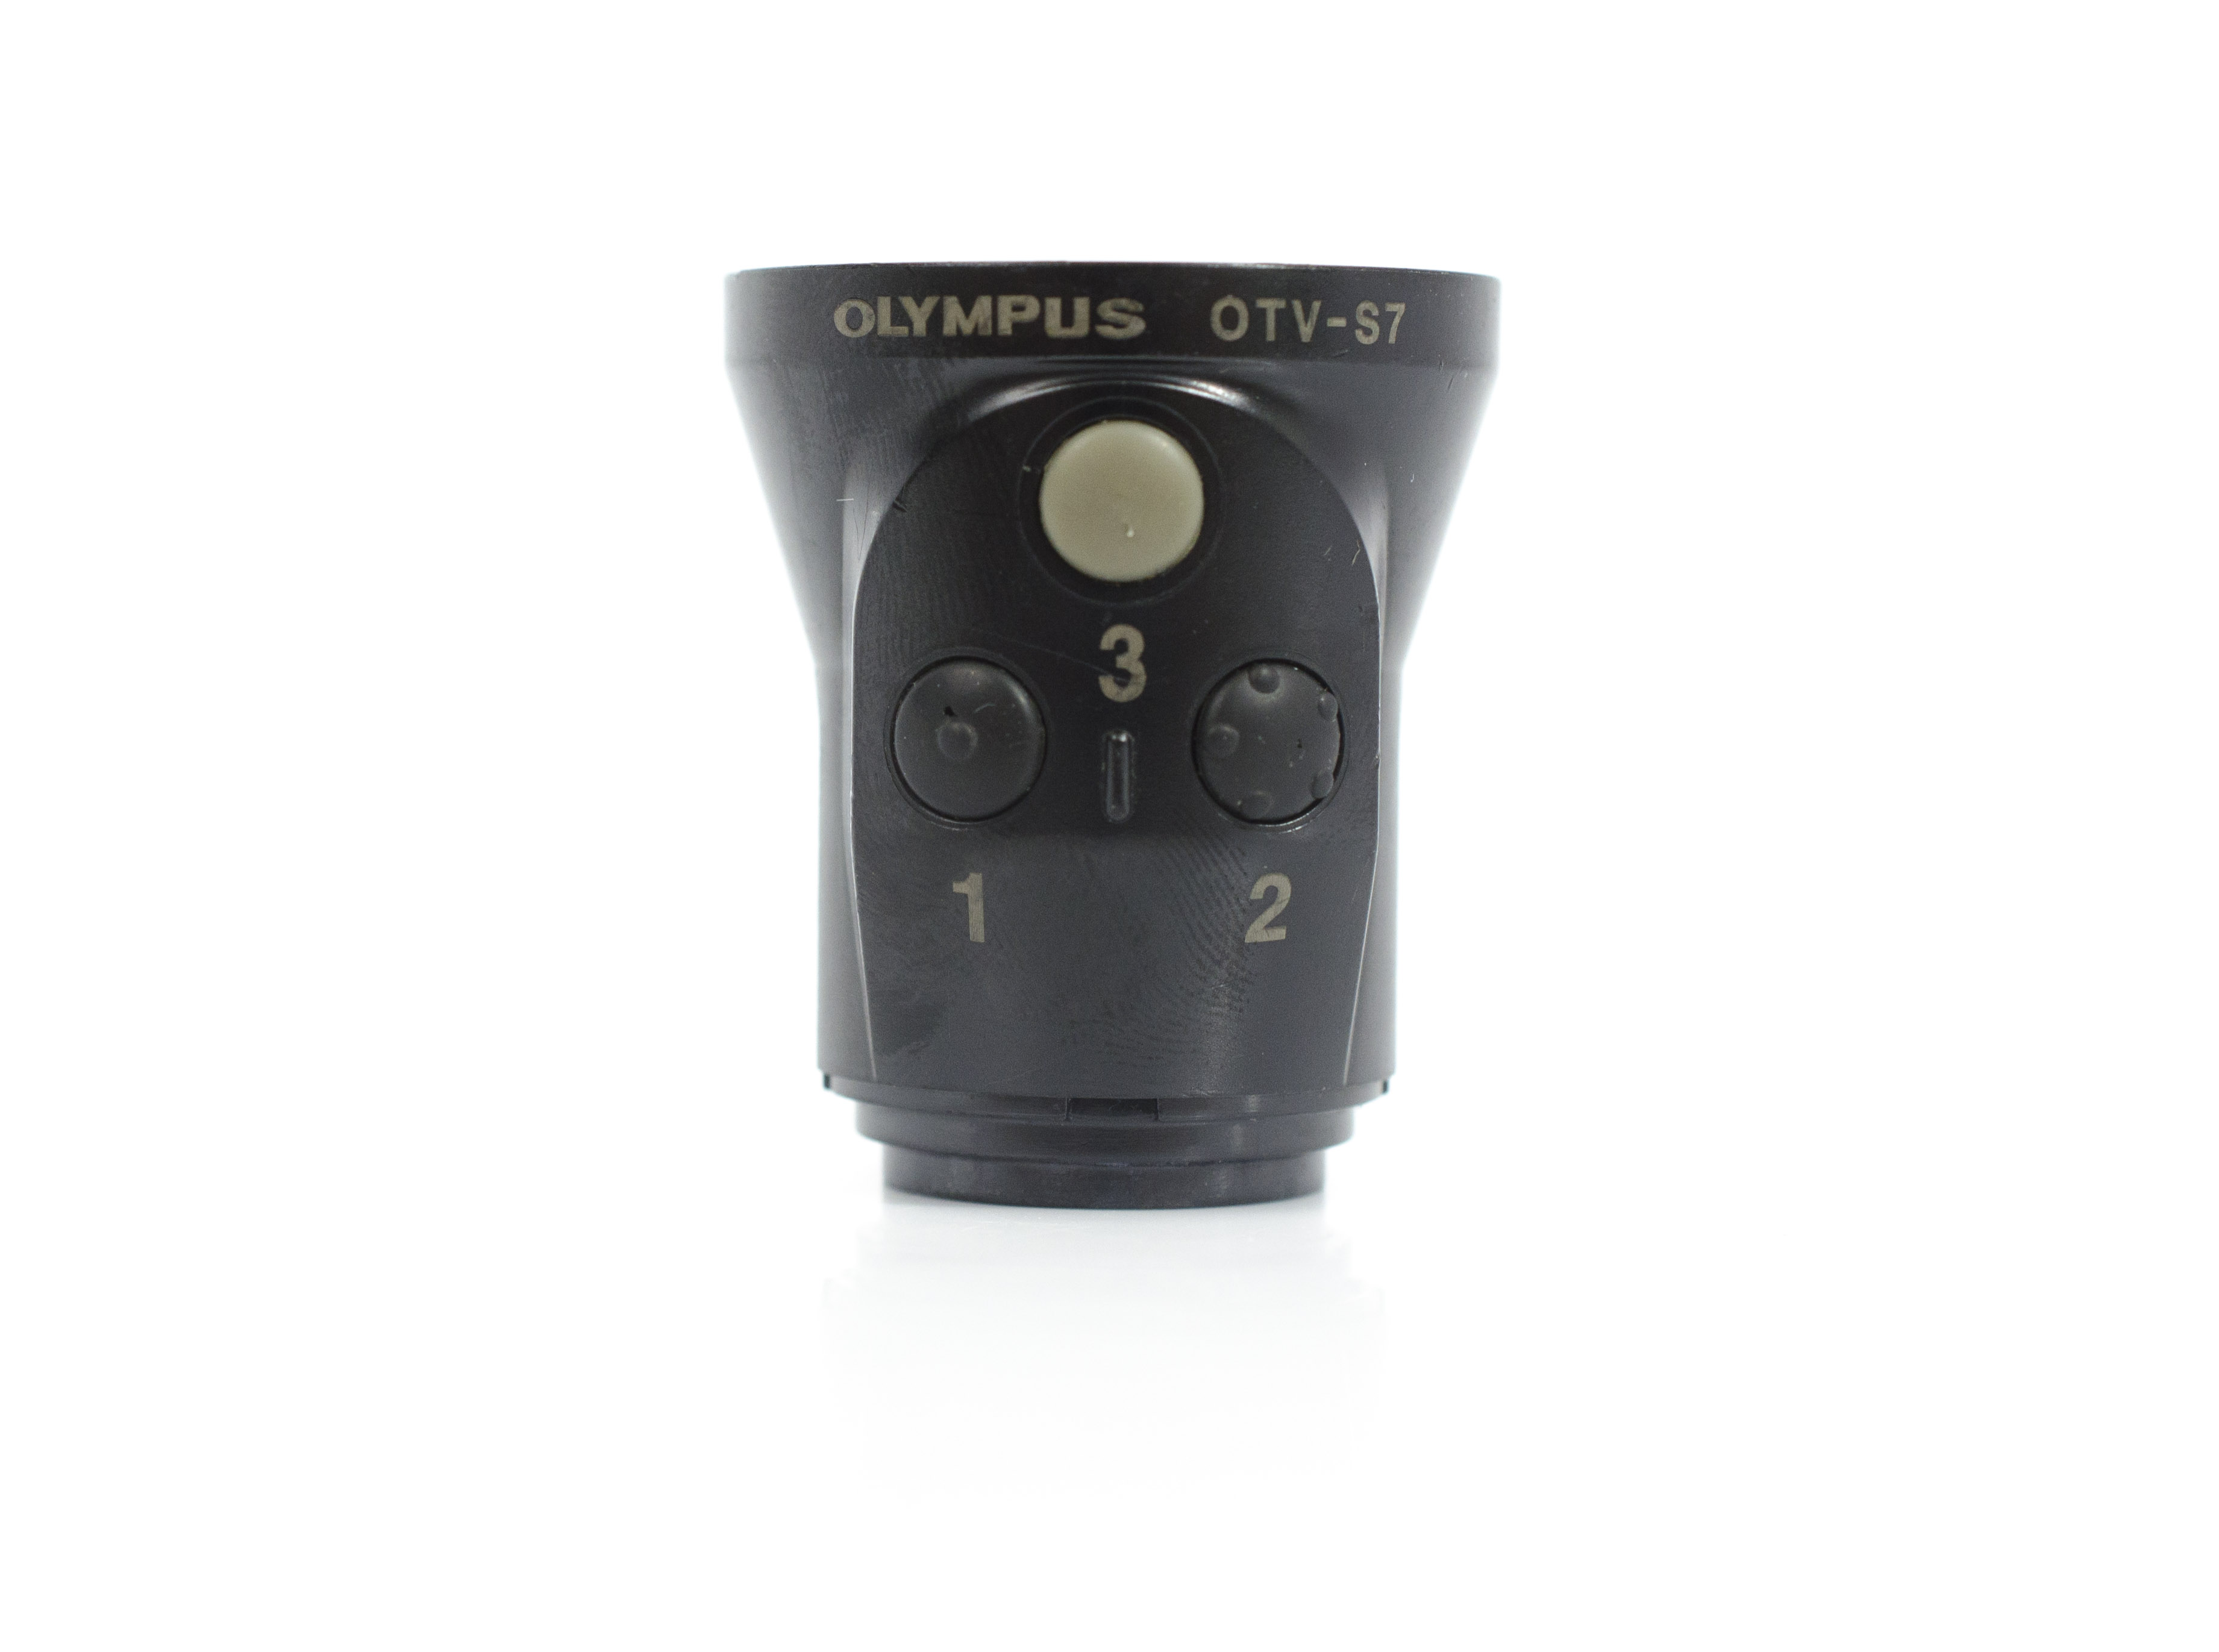 Camera Head Housing with Buttons - OTV-S7H